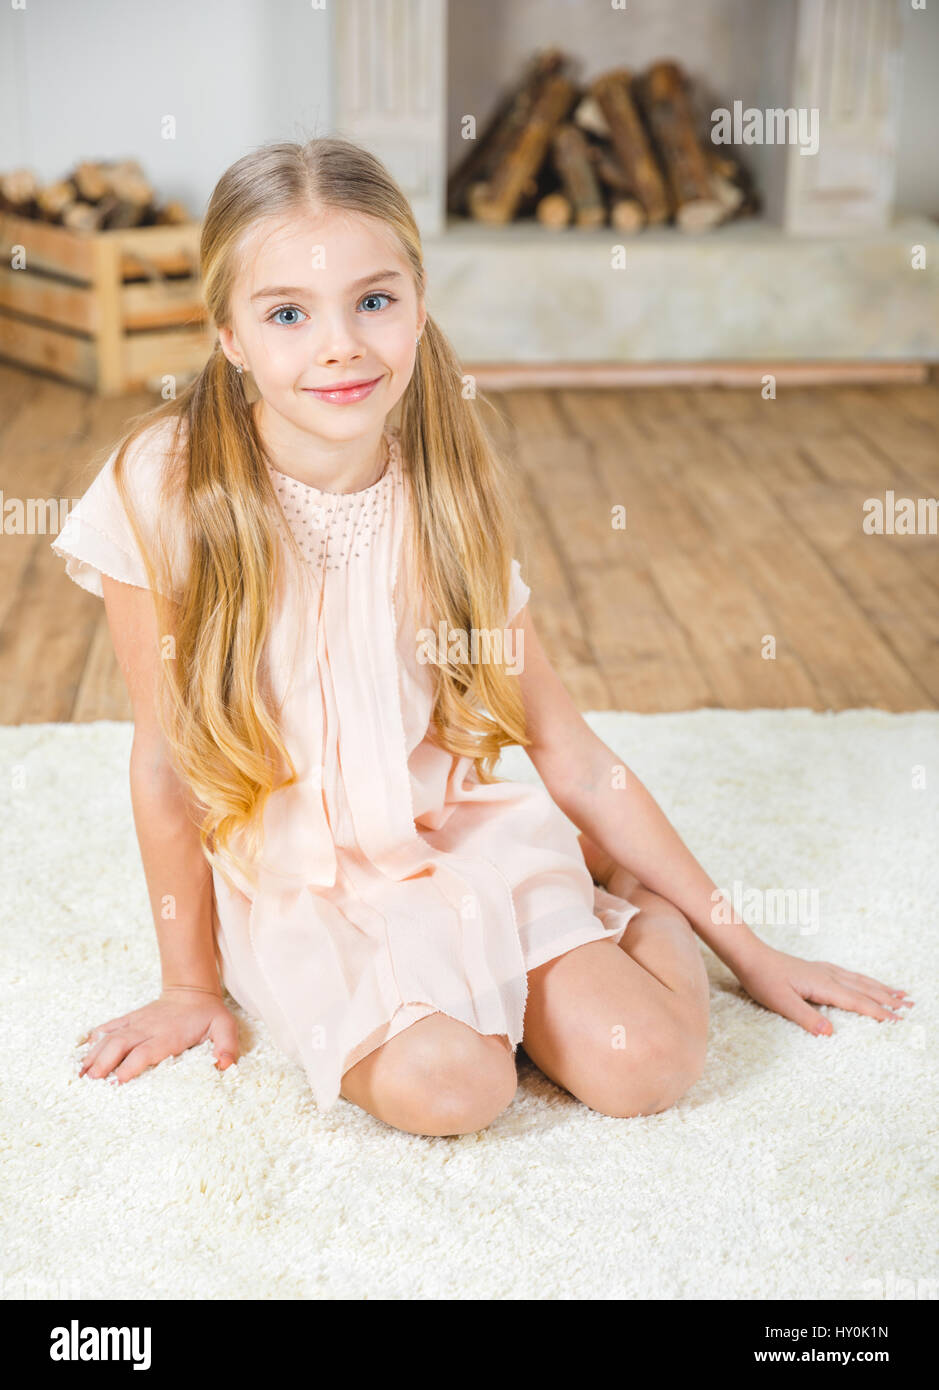 Cute little girl sitting on white carpet and smiling at camera